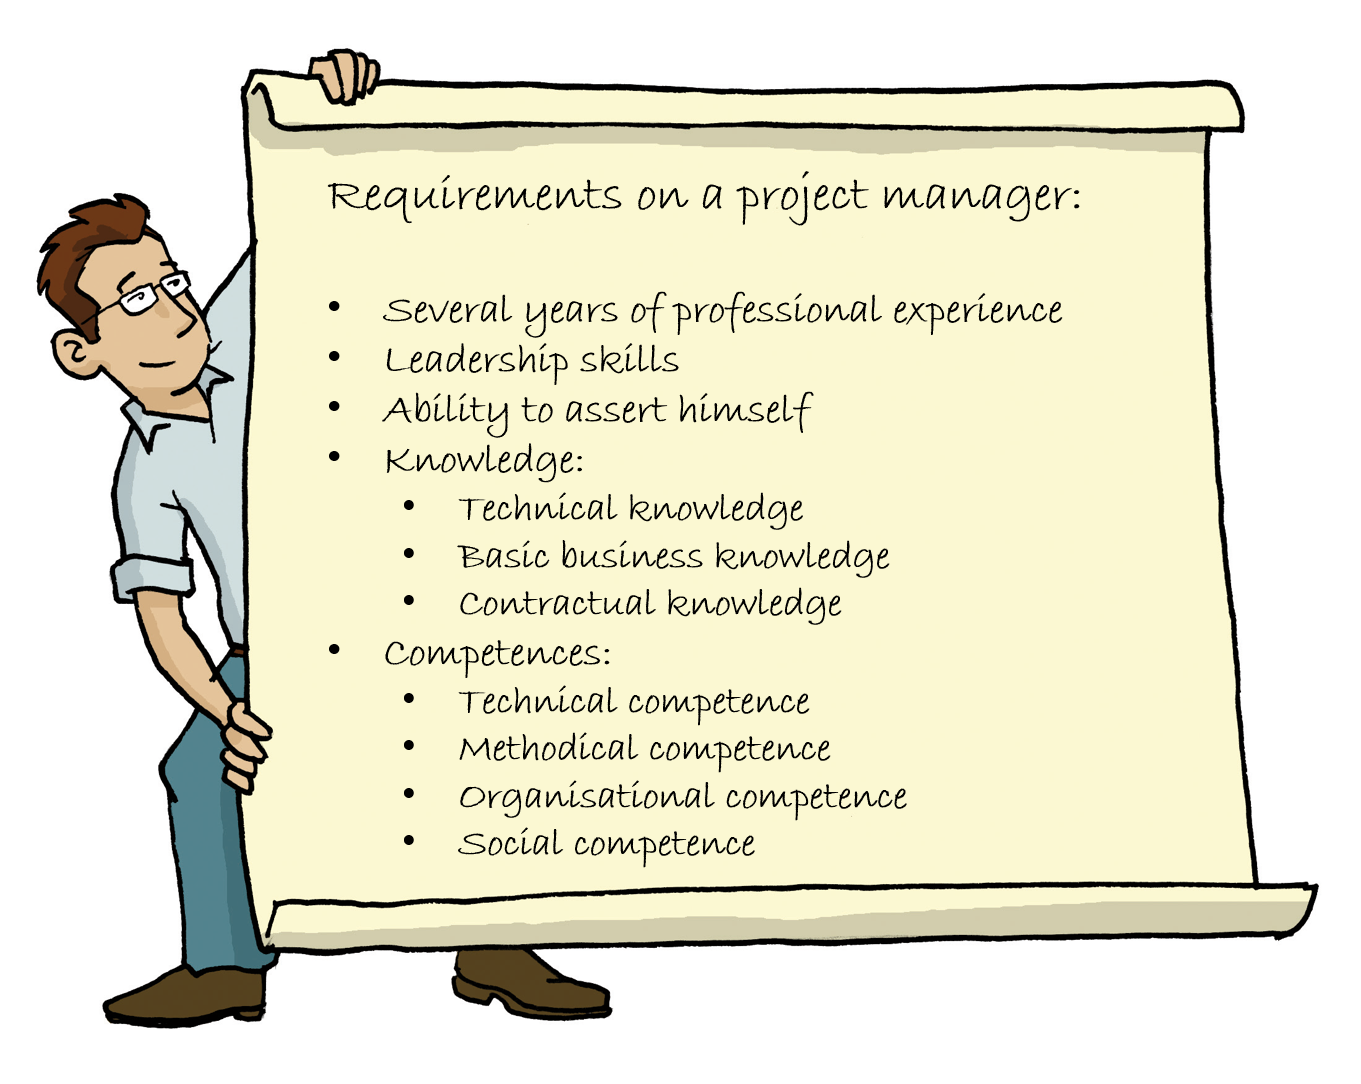 Requirements on a project manager include professional experience and leaderhip skills but also knowledge and competences.